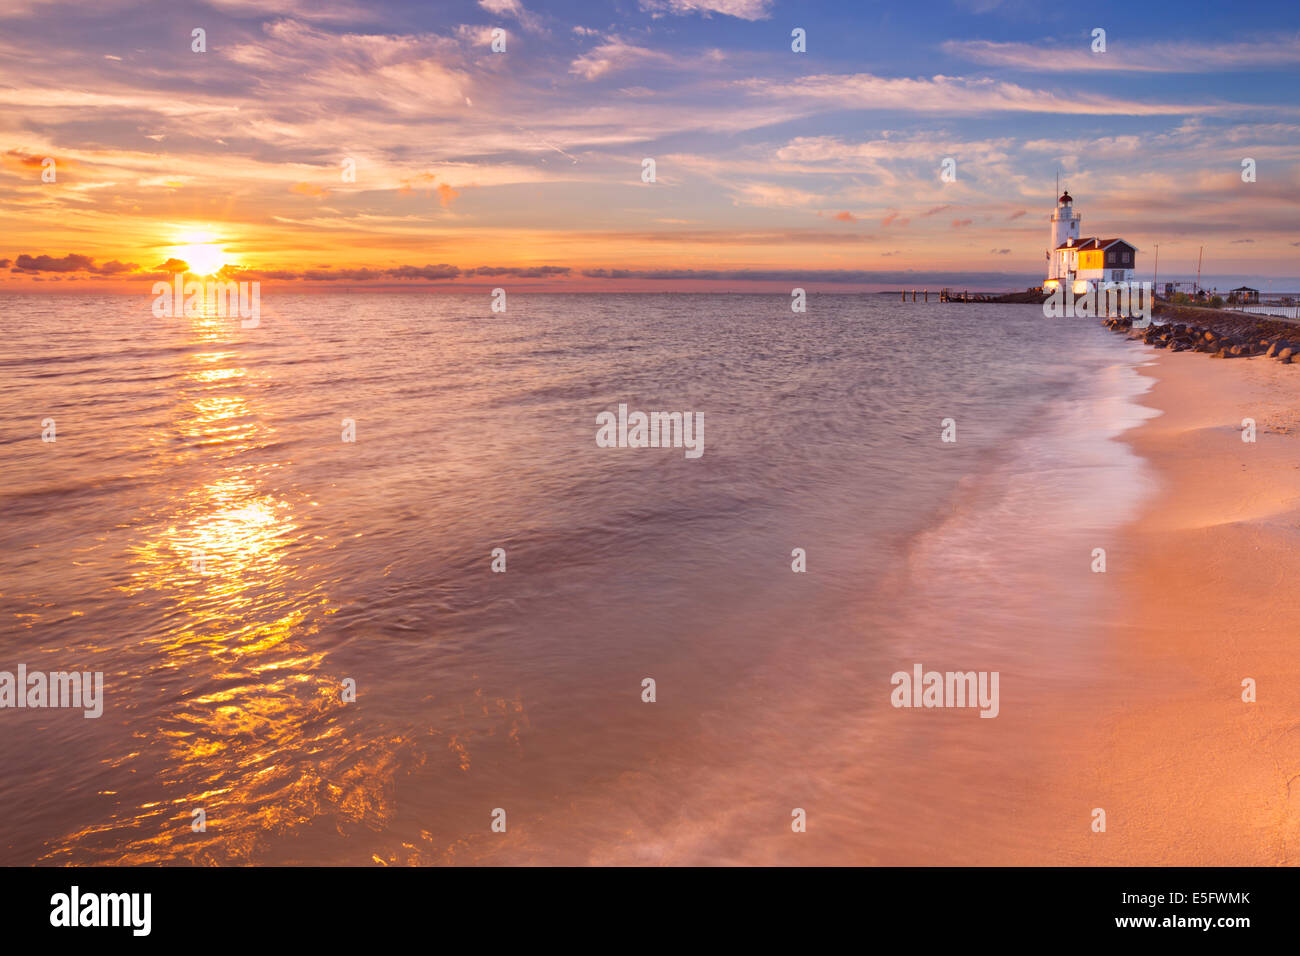 The lighthouse of the island of Marken, The Netherlands. Photographed at sunrise. Stock Photo